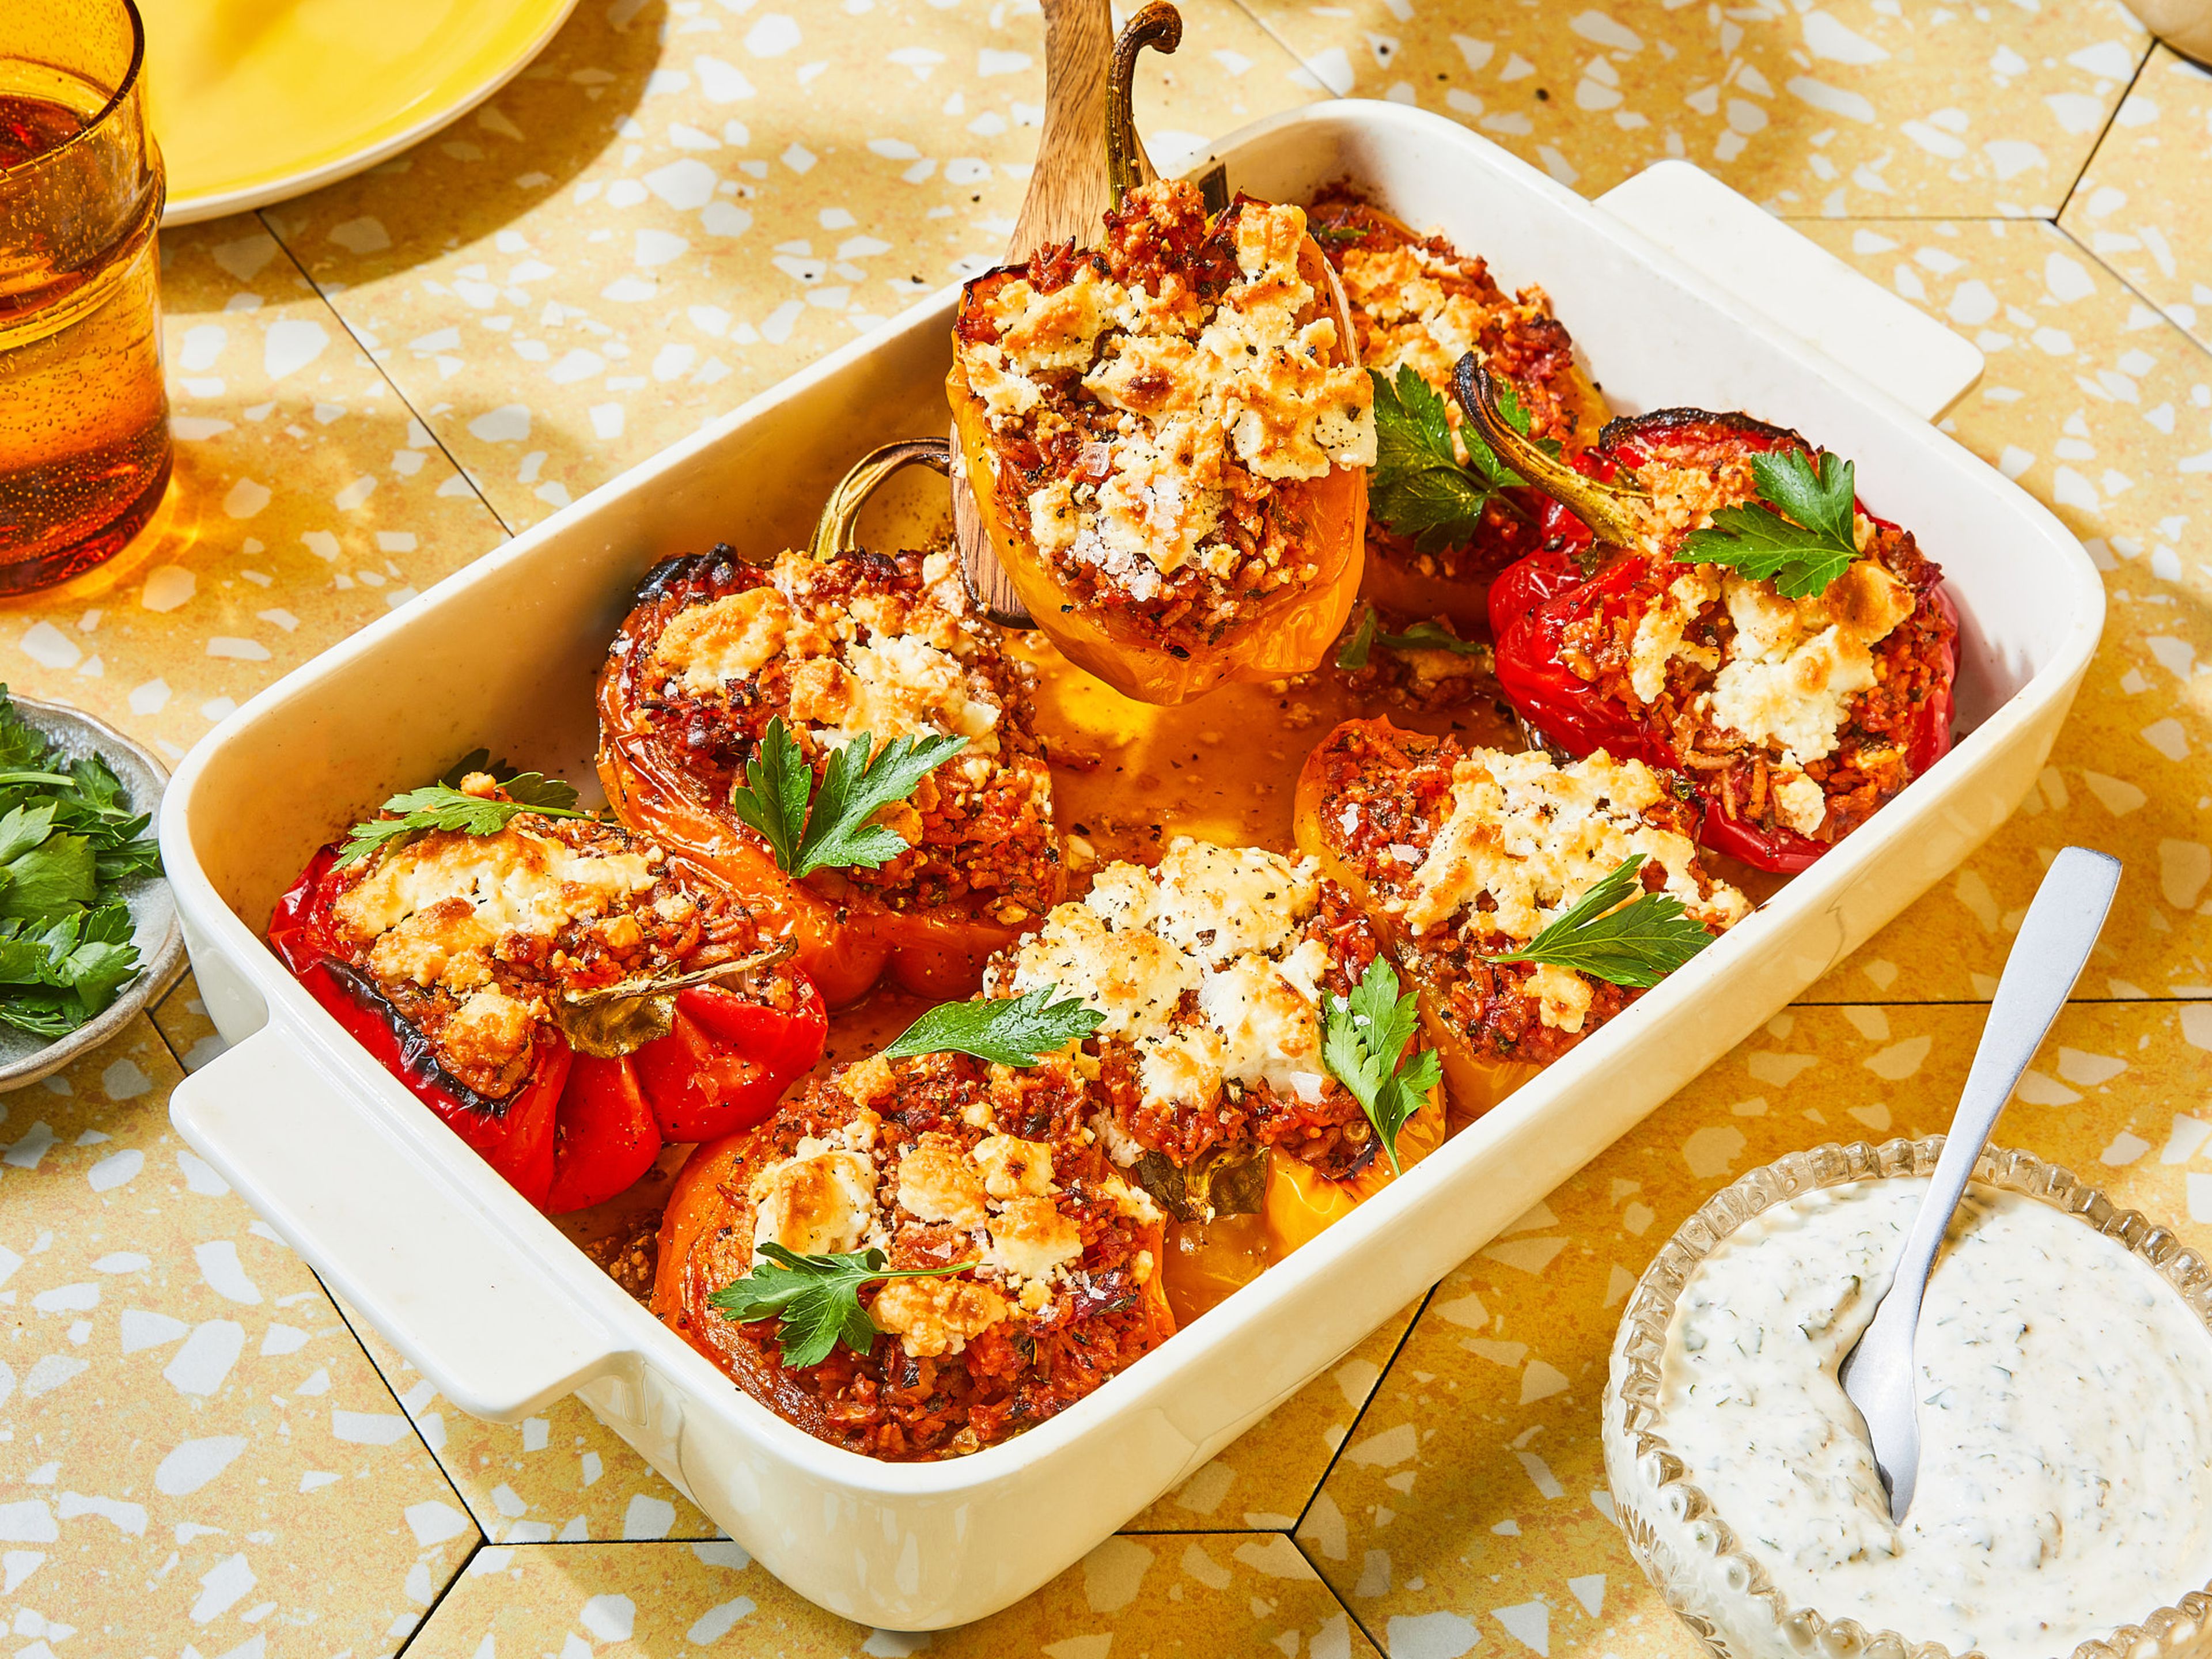 Vegetarian stuffed bell peppers with rice and feta